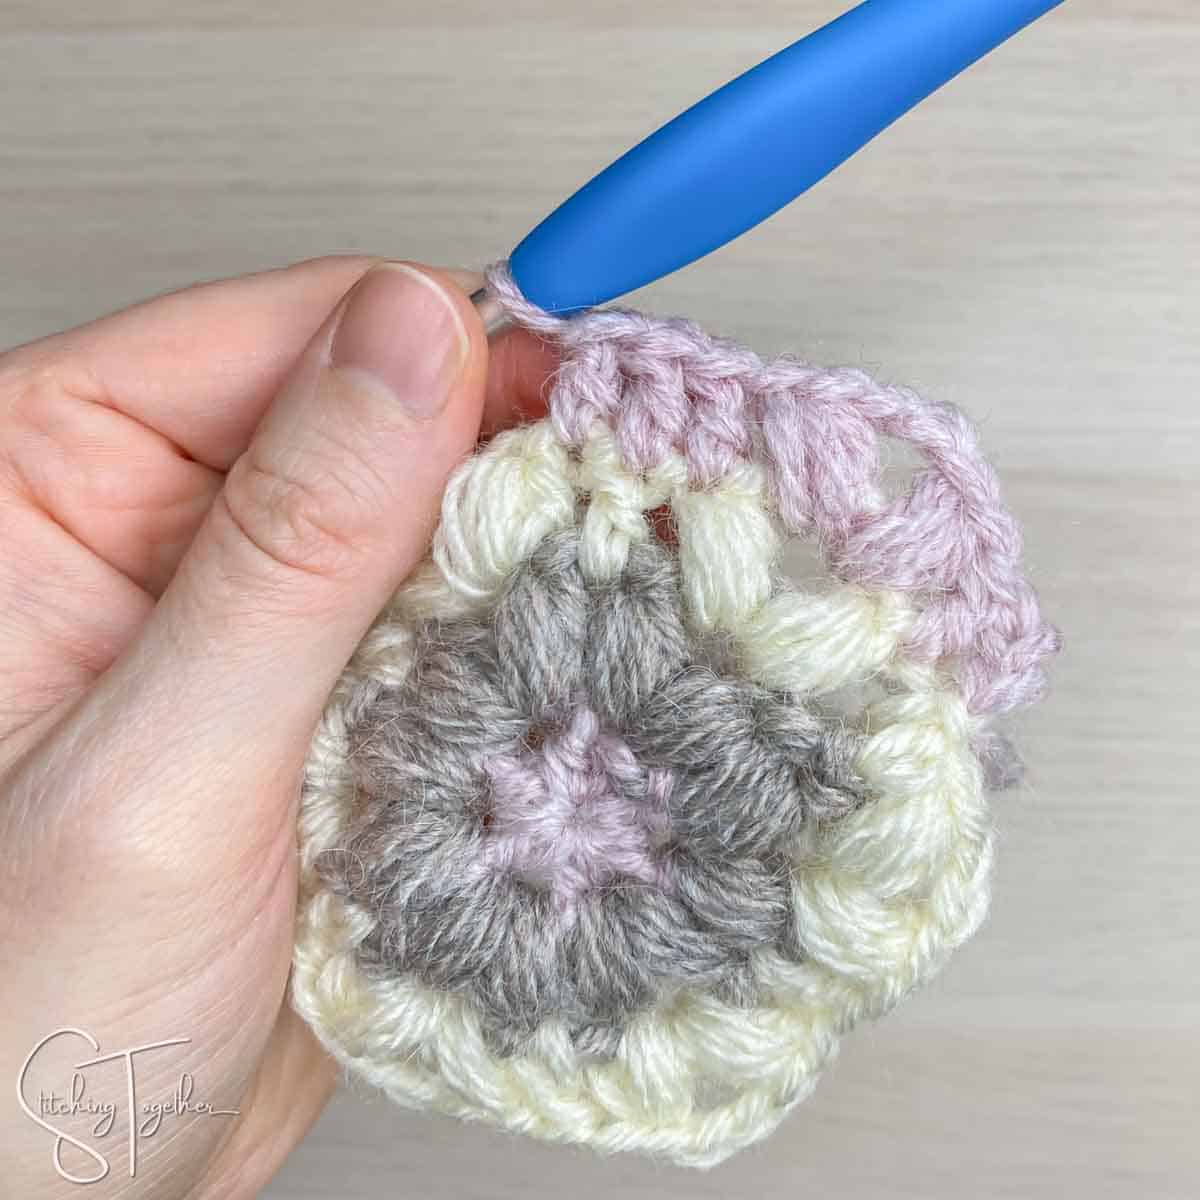 showing stitch placement for round 4 of a hexagon